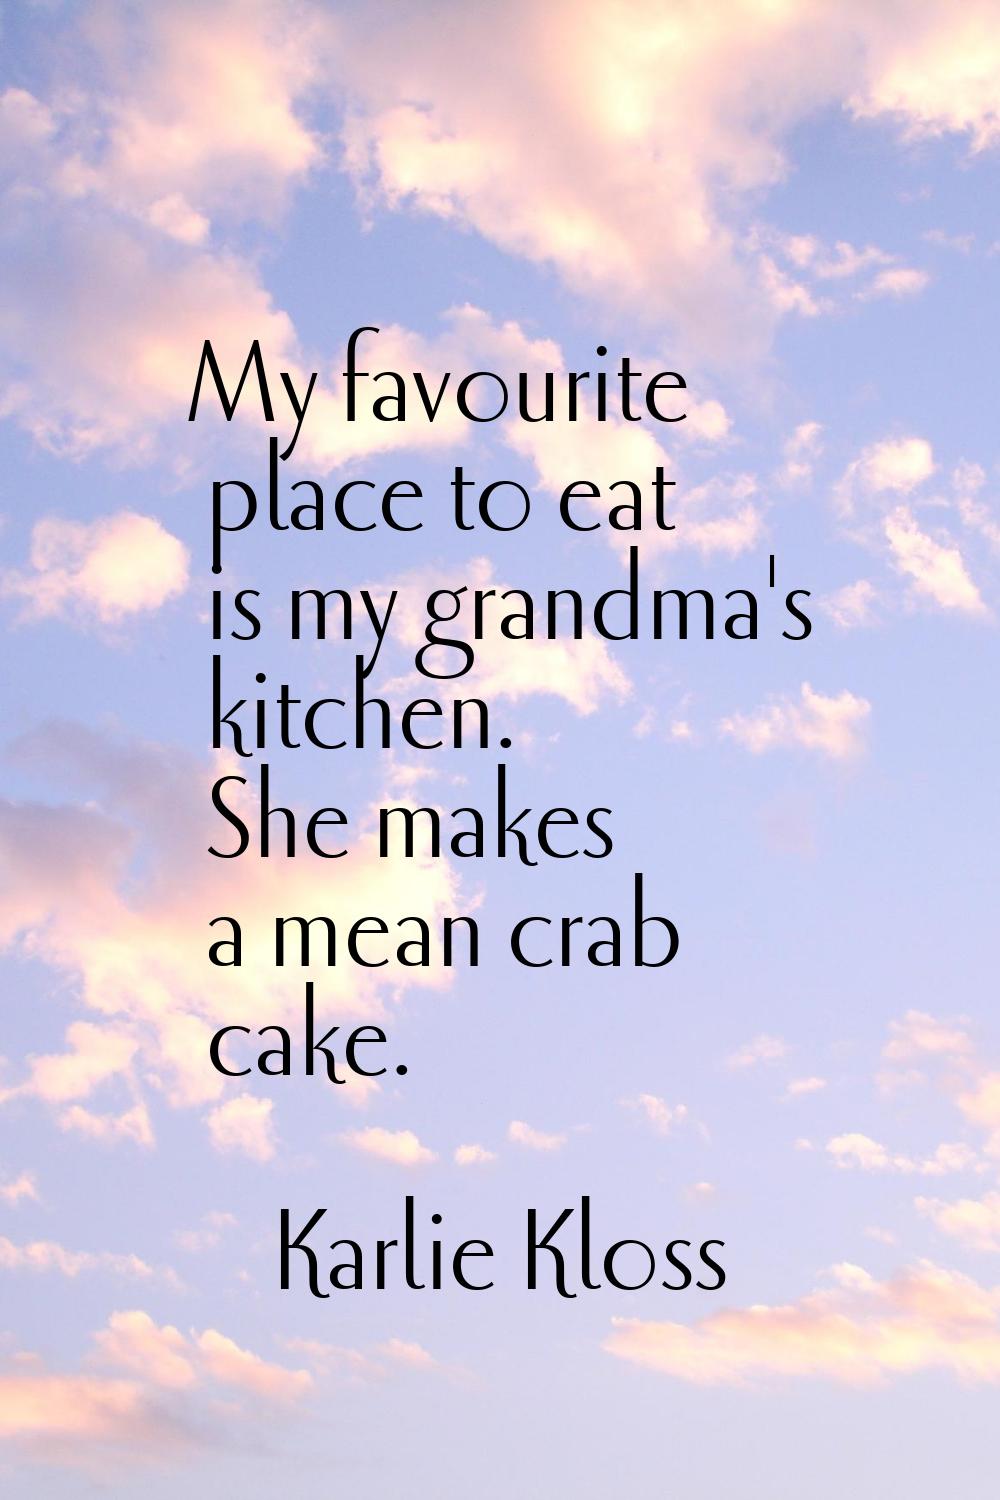 My favourite place to eat is my grandma's kitchen. She makes a mean crab cake.